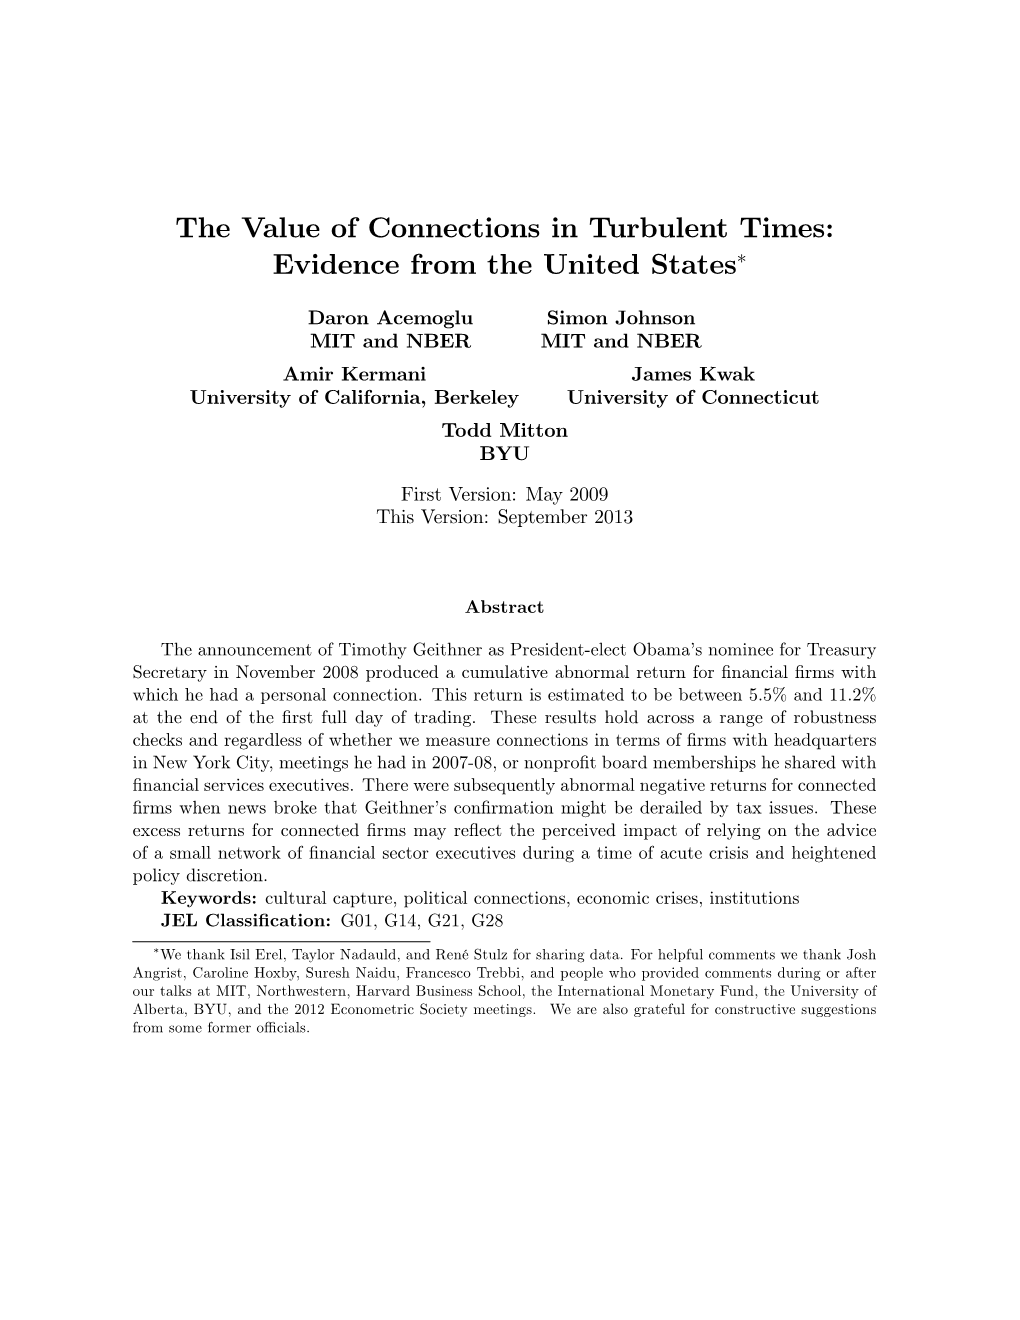 The Value of Connections in Turbulent Times: Evidence from the United States